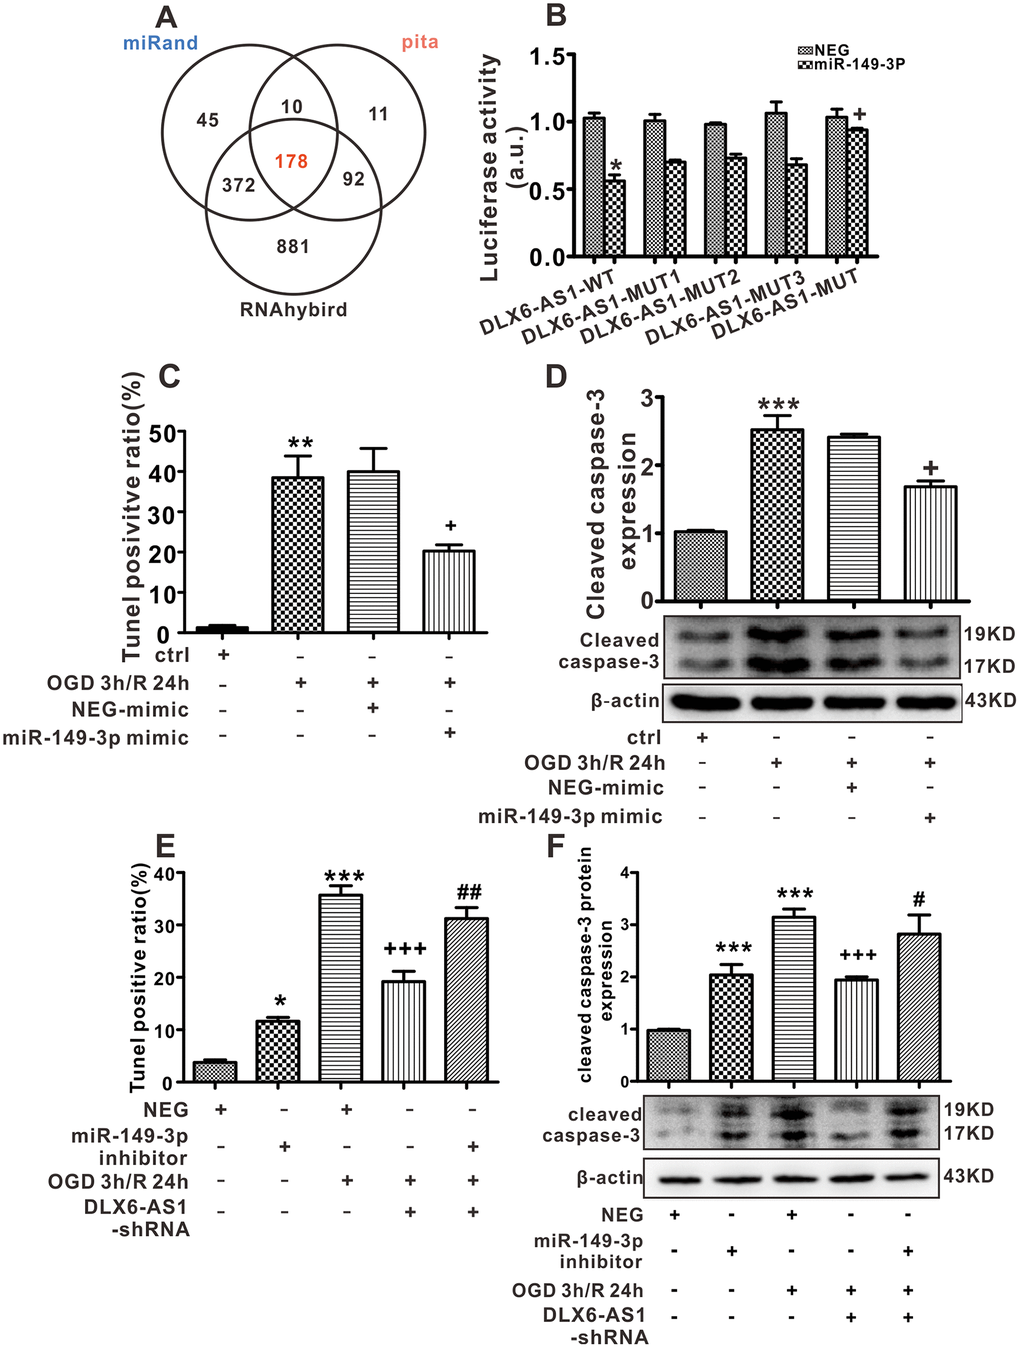 miR-149-3p may be a target of DLX6-AS1. (A) Predicted binding miRNAs of DLX6-AS1 derived from 3 databases. (B) Luciferase assay results of DLX-AS1 wild type (WT) and mutant (MUT) construct binding with mmu-miR-149-3p. (C) Effects of a miR-149-3p mimic on apoptosis induced by OGD/R, as detected by TUNEL staining. (D) Effects of a miR-149-3p mimic on caspase-3 expression induced by OGD/R in N2a cells detected by western blotting. (E) Effects of a miR-149-3p inhibitor on apoptosis induced by OGD/R, as detected by TUNEL staining. (F) Effects of a miR-149-3p inhibitor on caspase-3 expression induced by OGD/R in N2a cells detected by western blotting. Values represent the mean ± SEM (n = 3 in each group). *P +P +++P #P ##P 